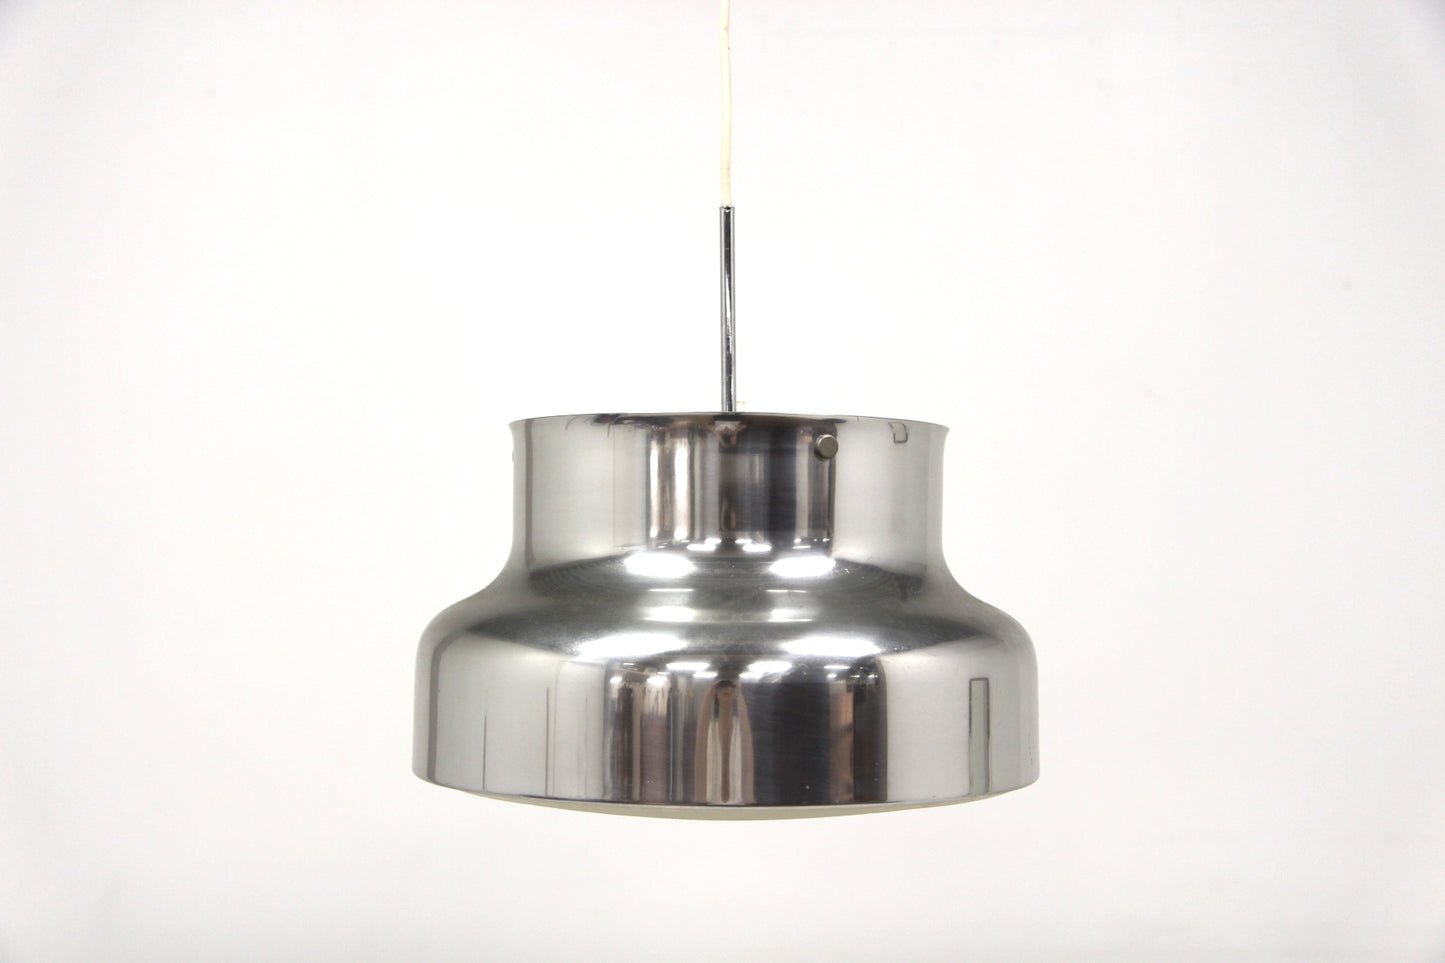 Lampada a sospensione "Bumling" Anders Pehrsson design svedese vintage anni 60 [sw24401]